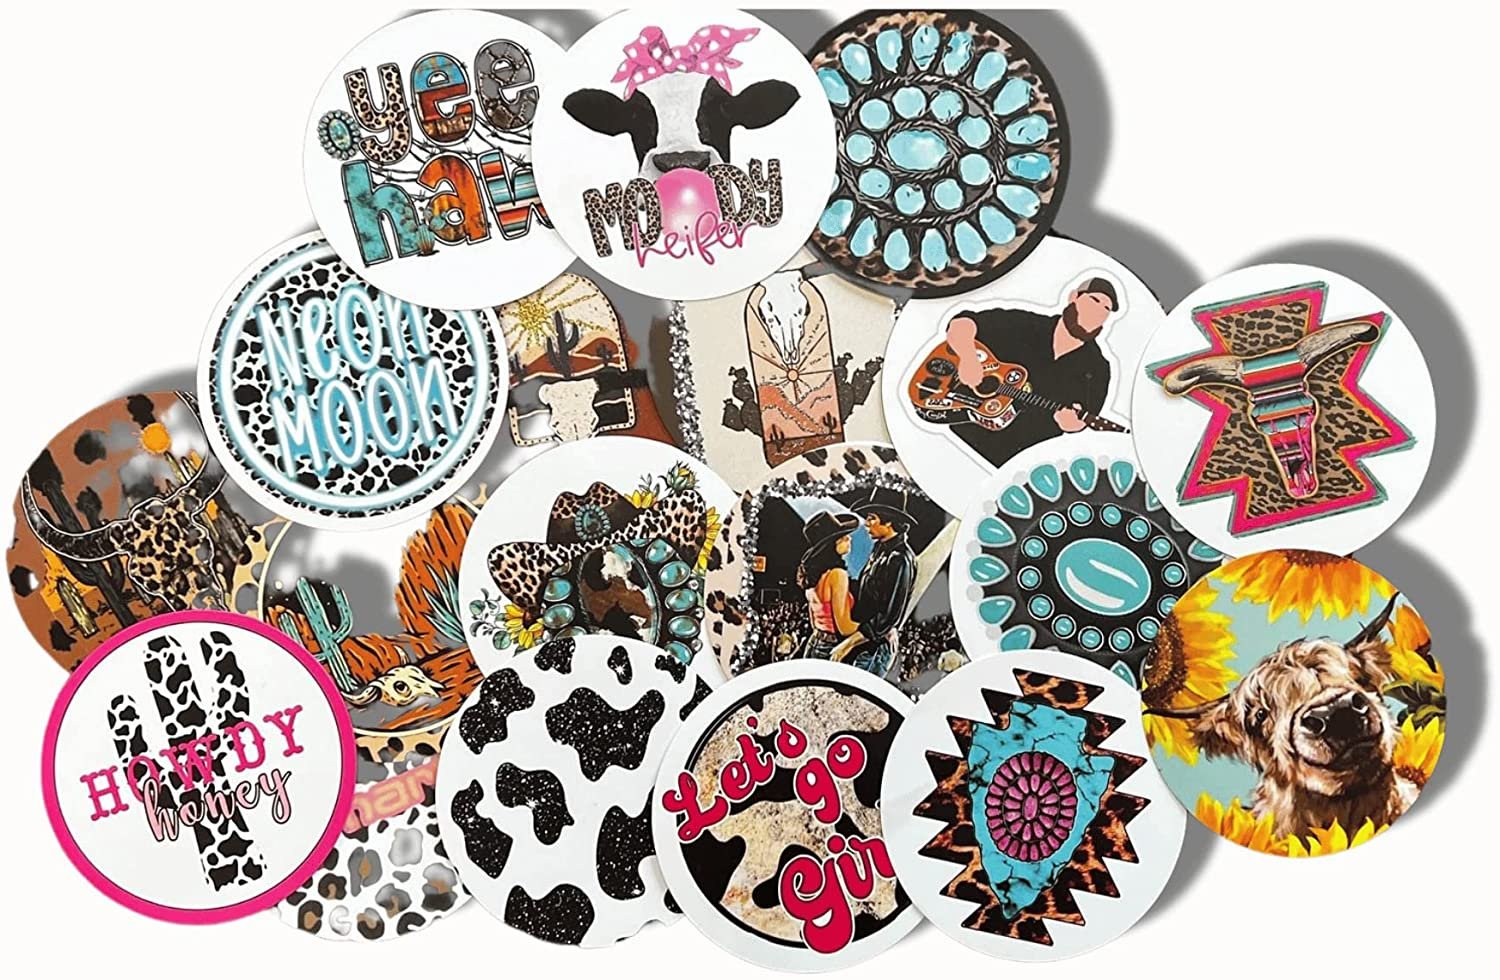 Freshie Cardstock Cutouts Rounds 3 inch for Freshies Random Mix 32 pk For  Scented Aroma Beads Bake with Mold for Car Freshie Designs, Western, Cow